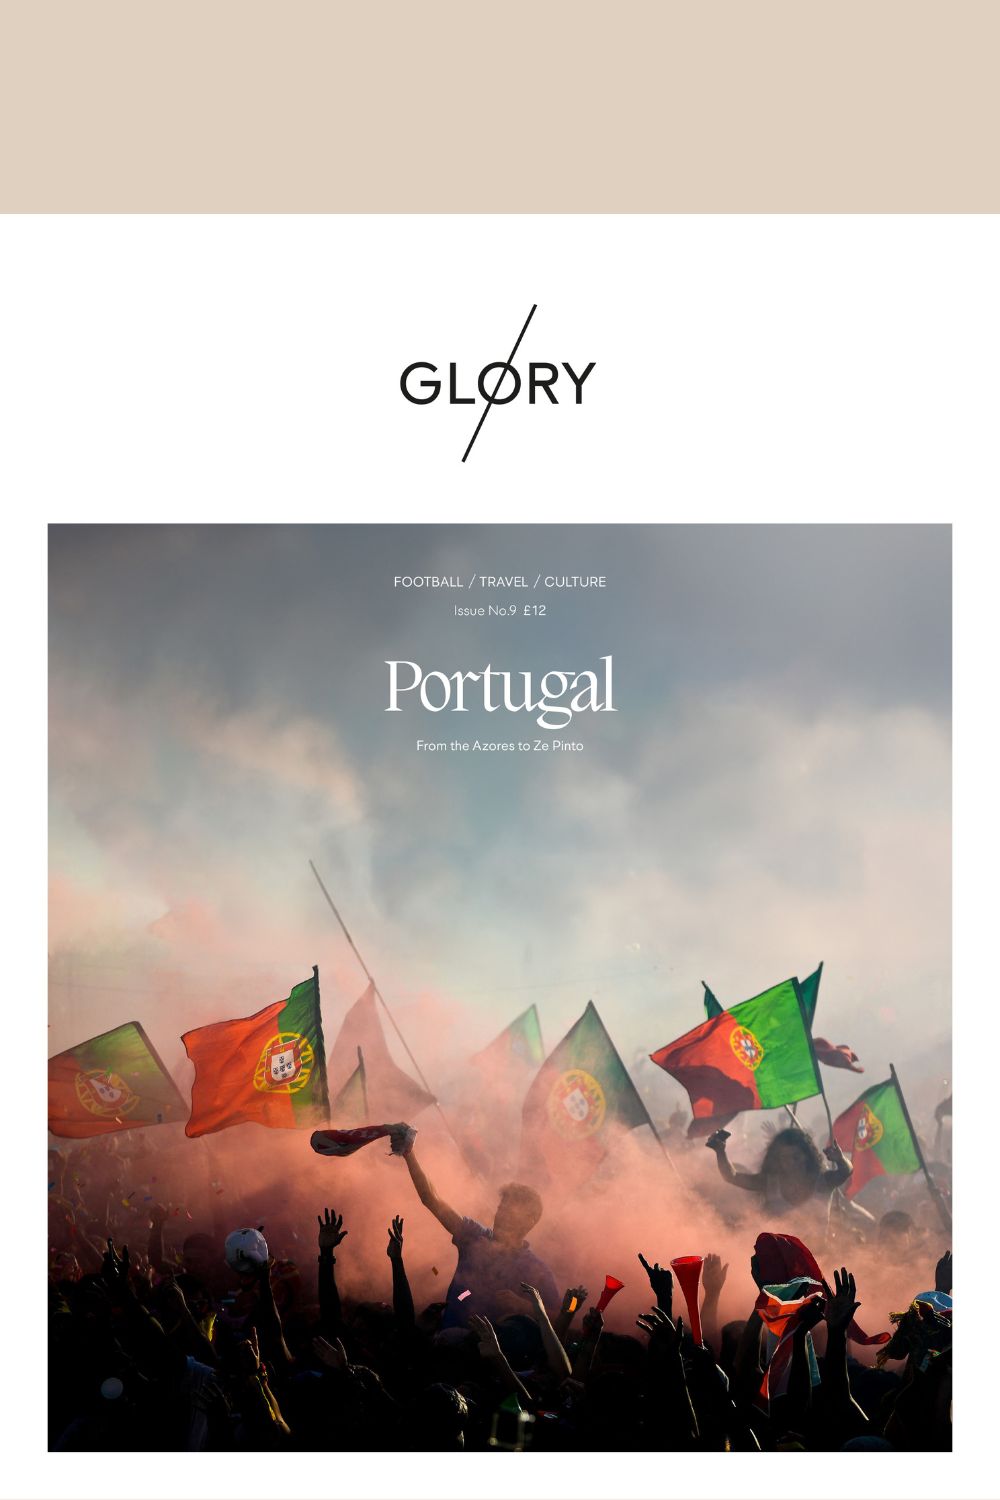 Glory Magazine Issue 12 Portugal cover